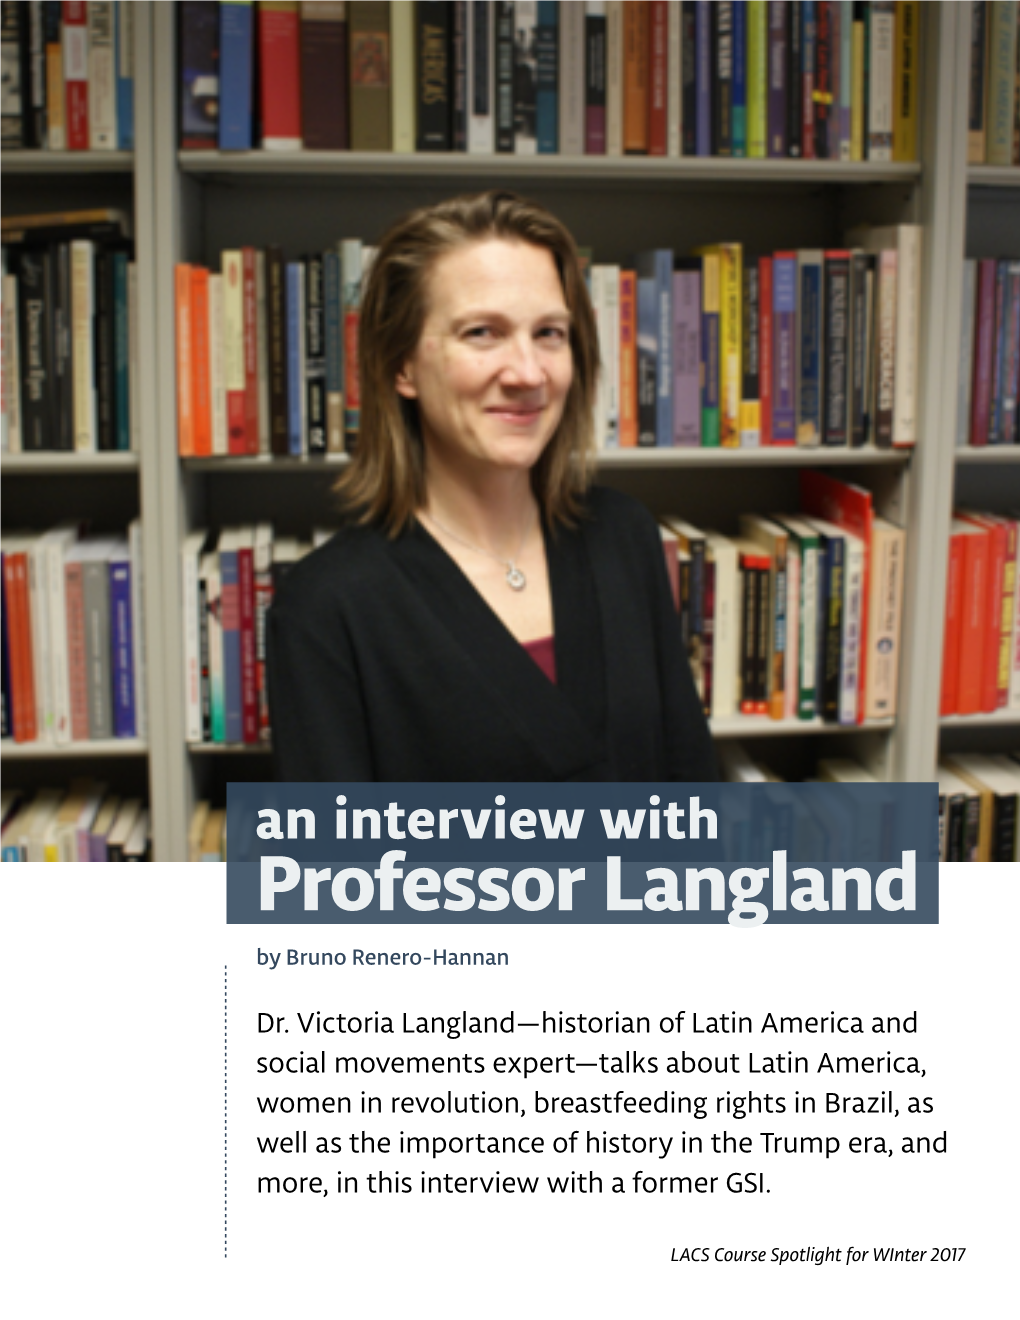 An Interview with Professor Langland by Bruno Renero-Hannan